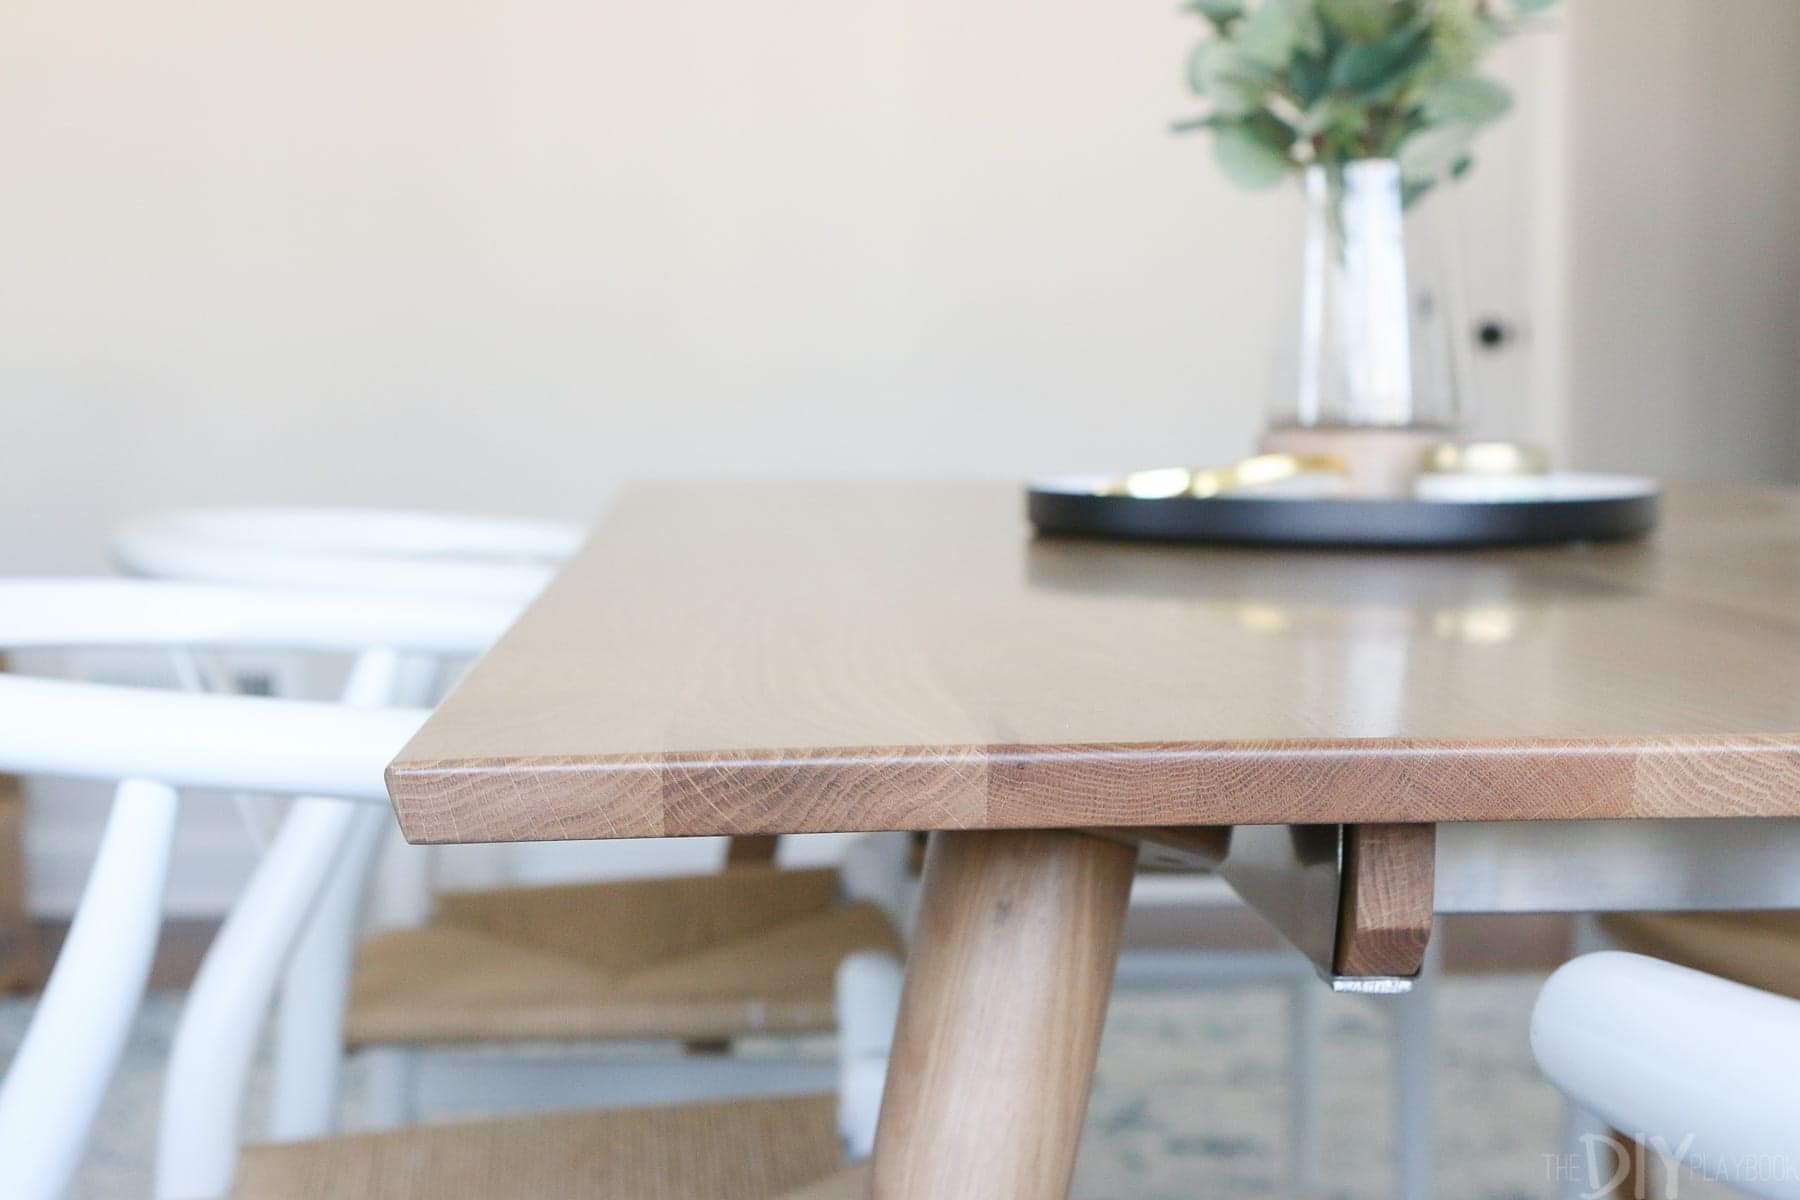 A New Article Dining Room Table and the Design Plan | The DIY Playbook